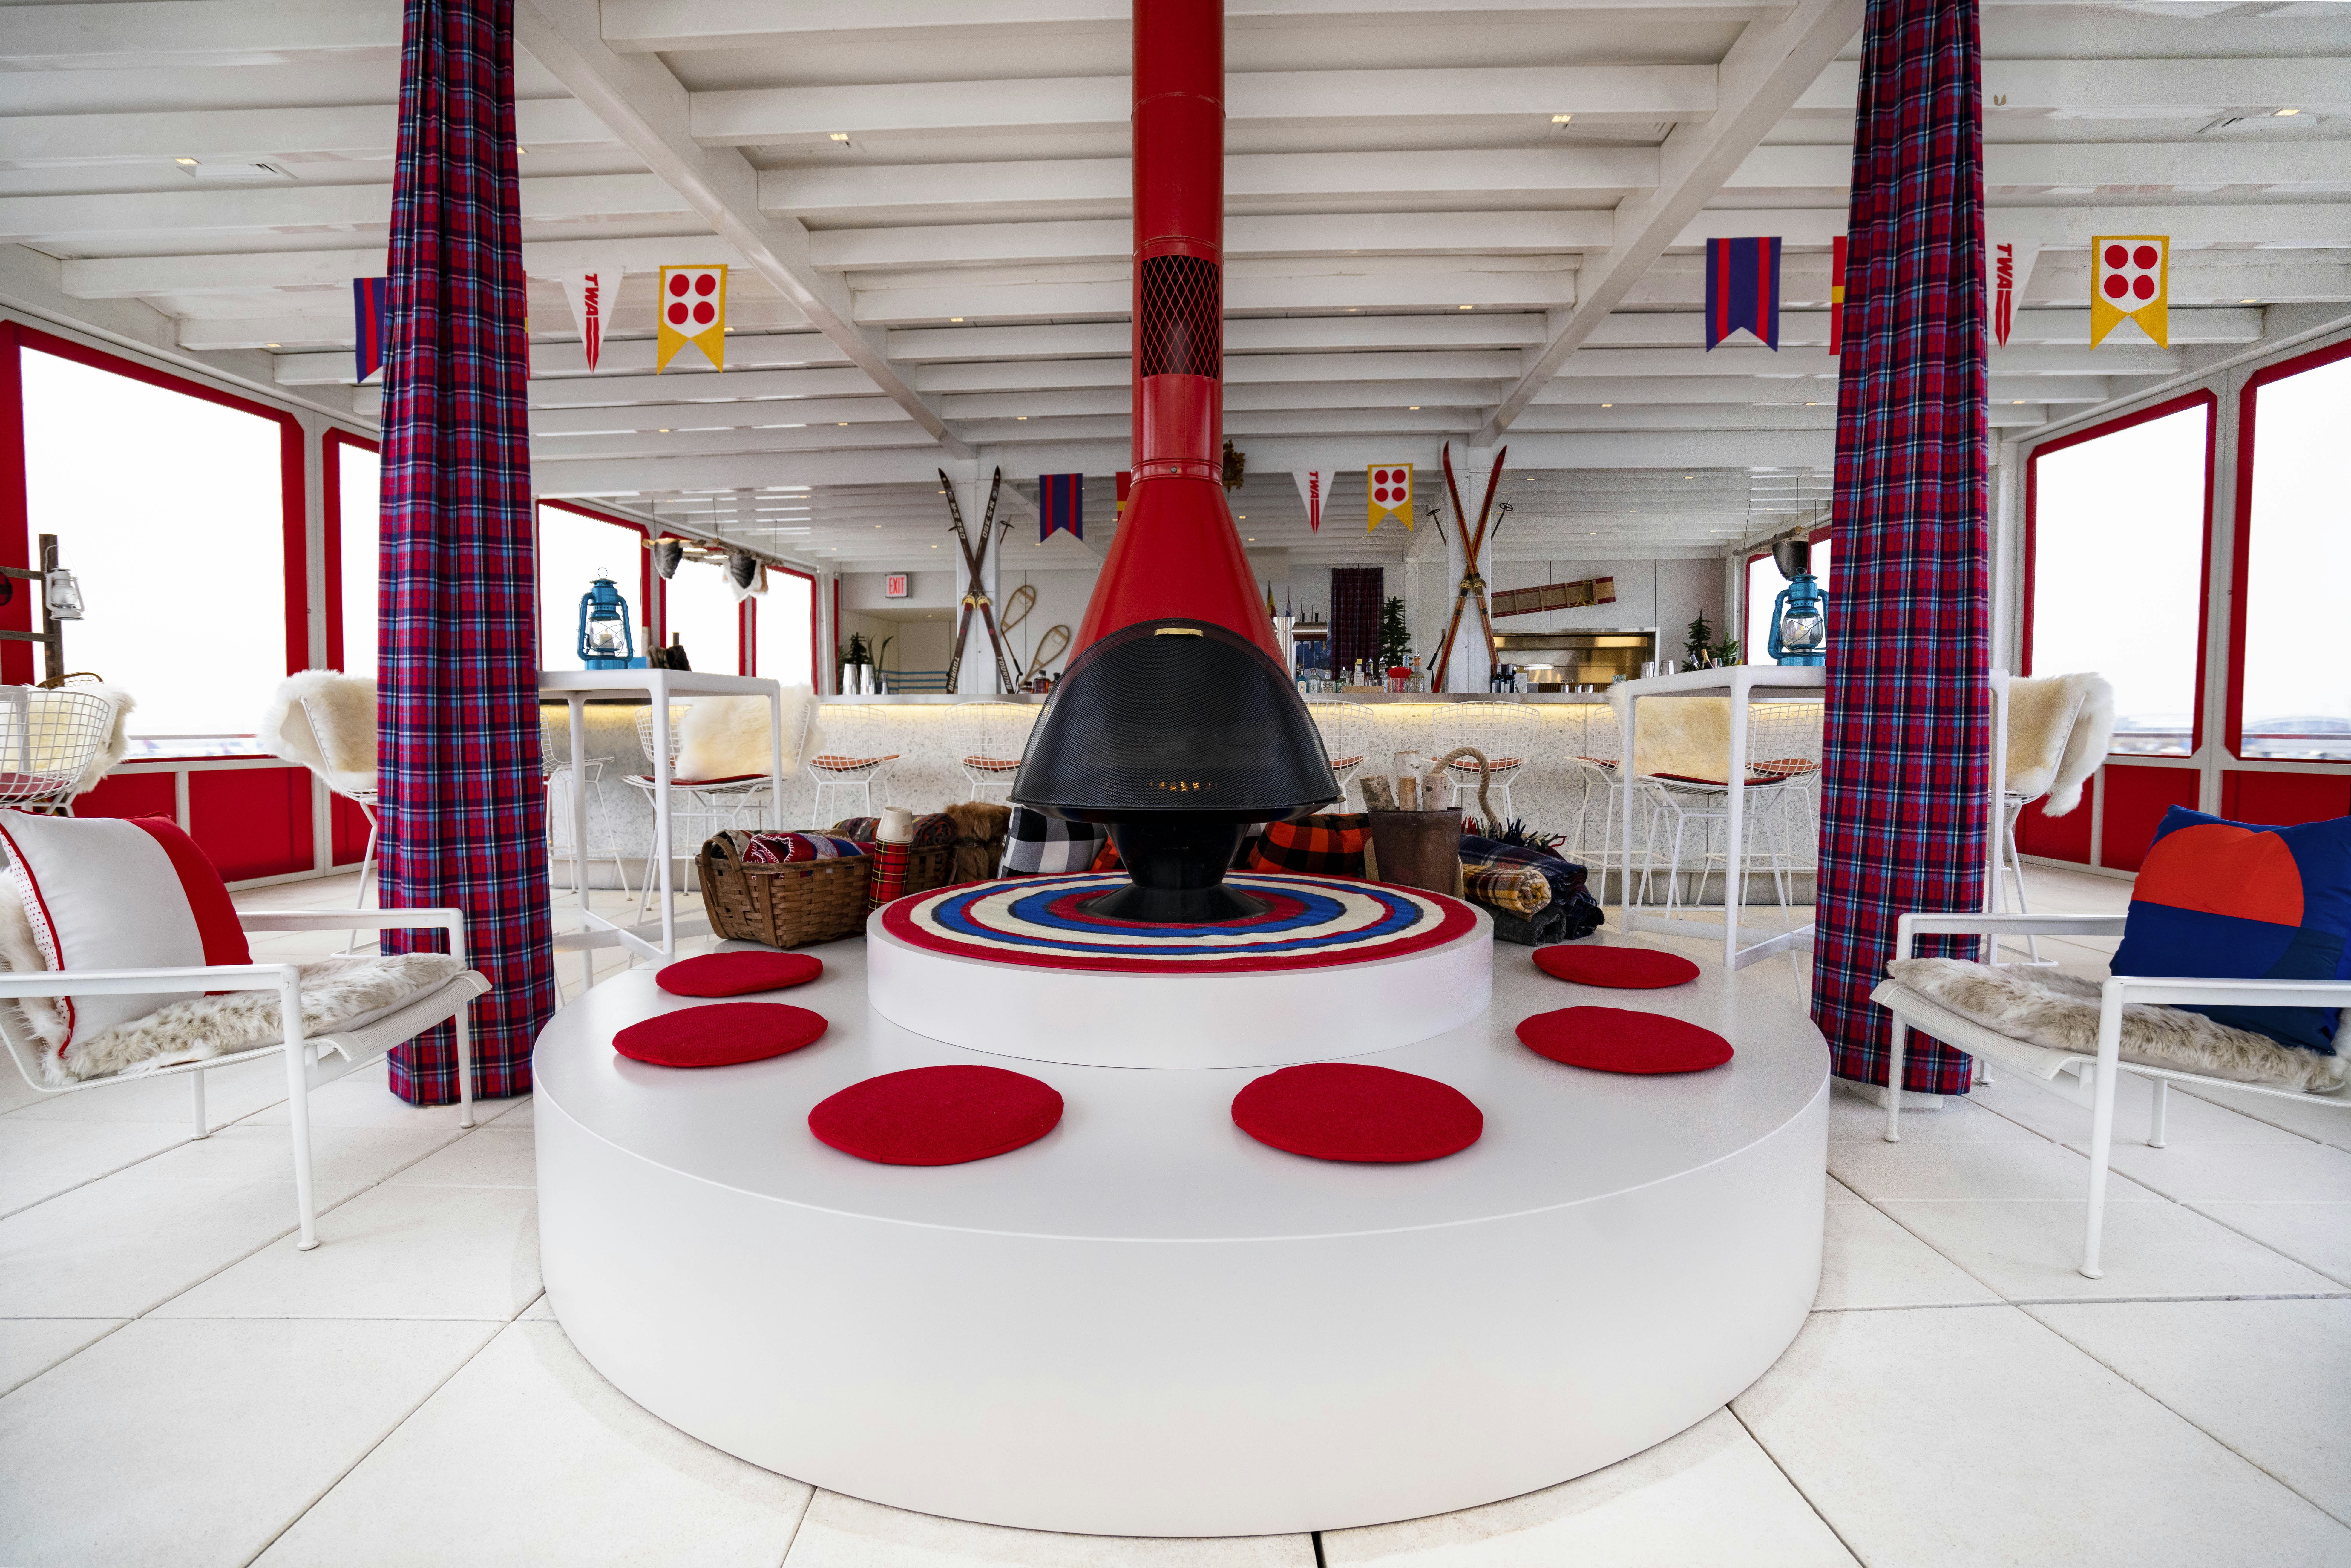 TWA Hotel Runway Chalet at The Pool Bar interior - red fireplace on a round white foundation with red cushions